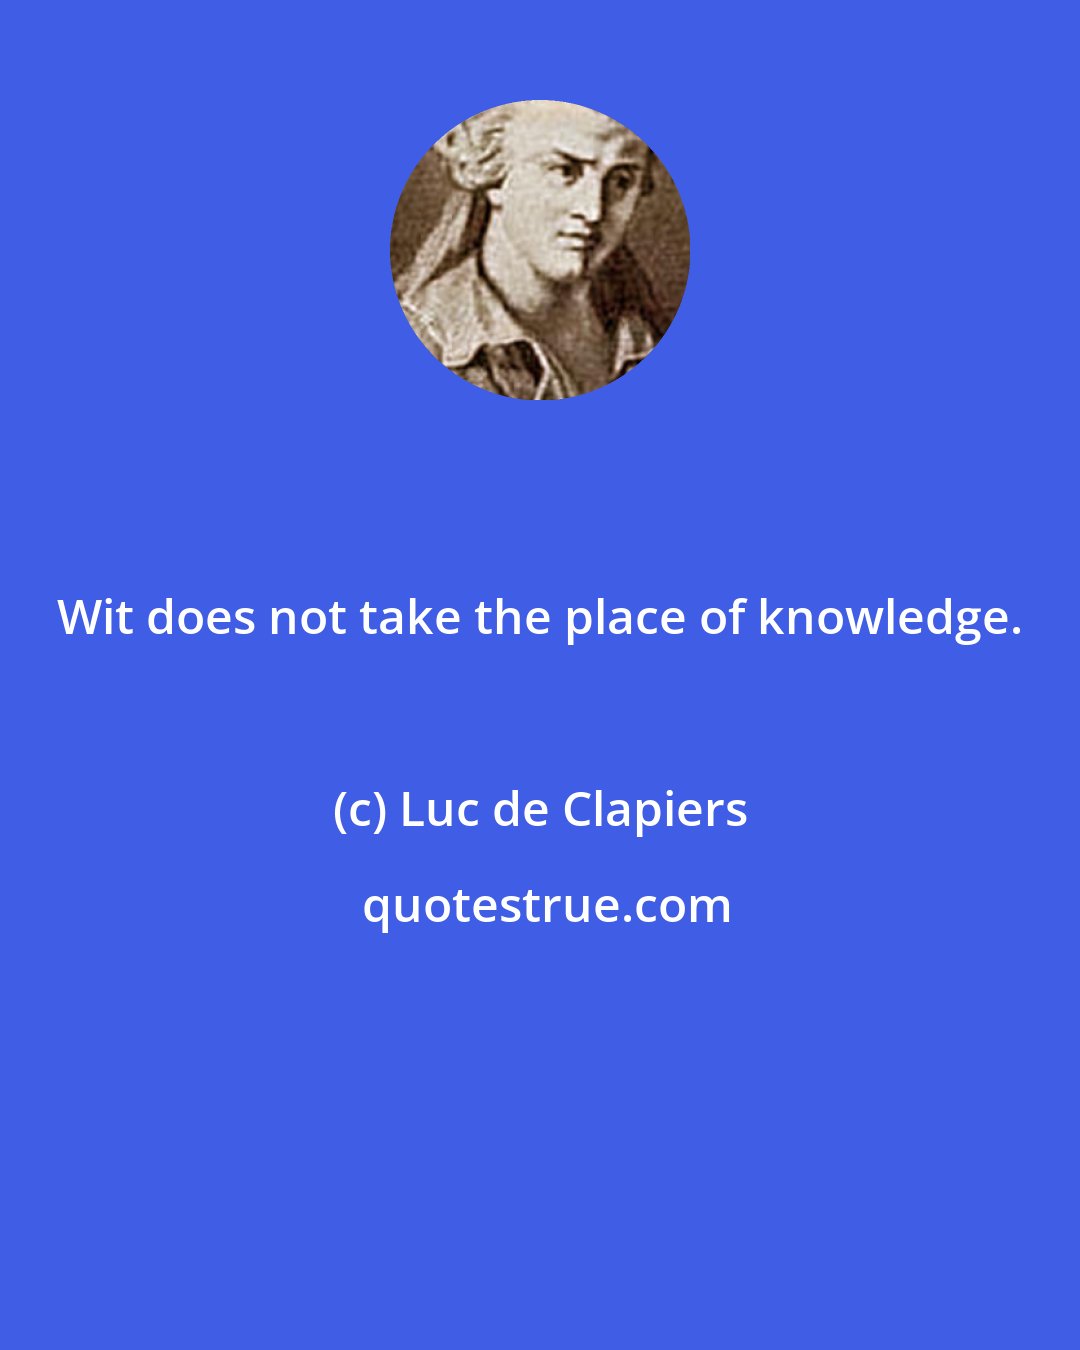 Luc de Clapiers: Wit does not take the place of knowledge.